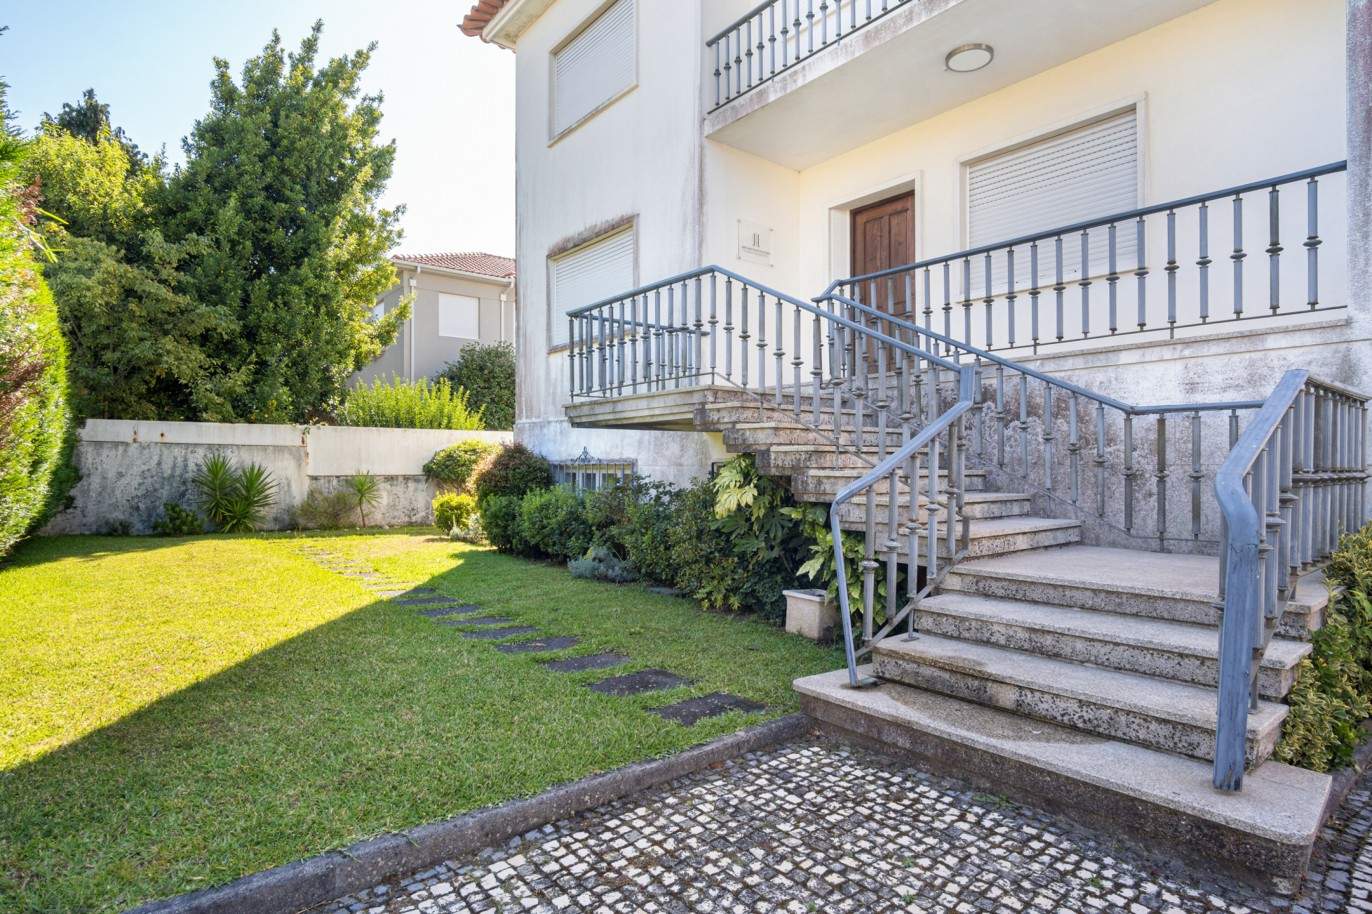 Selling: Detached House with garden for rehabilitation, in Lordelo do Ouro, Porto, Portugal_205499